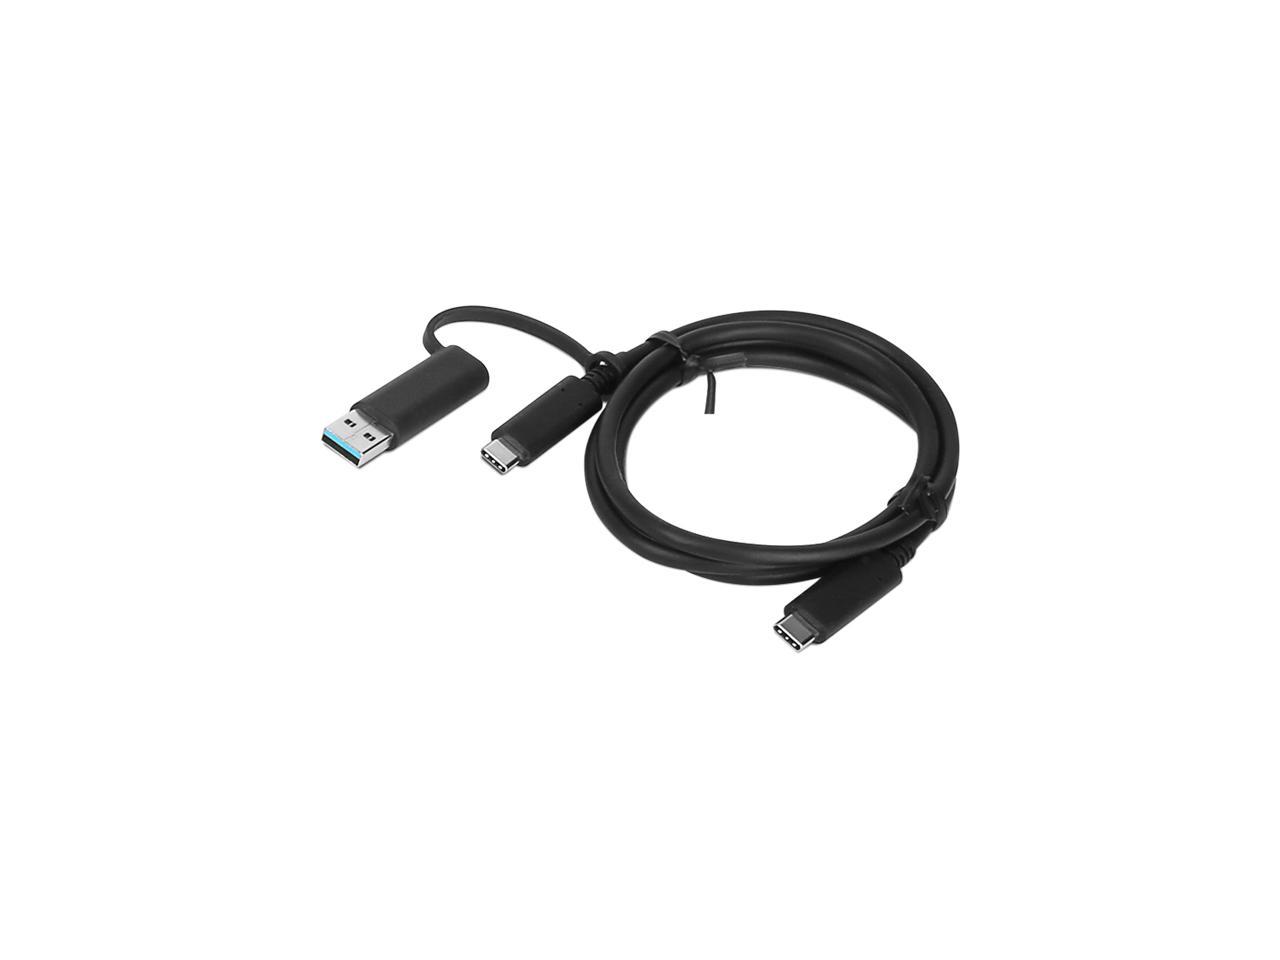 USB-C to USB-A Cable 6 Feet USB 3.0 Cabl Rosewill 2-Pack USB Type C to Type A